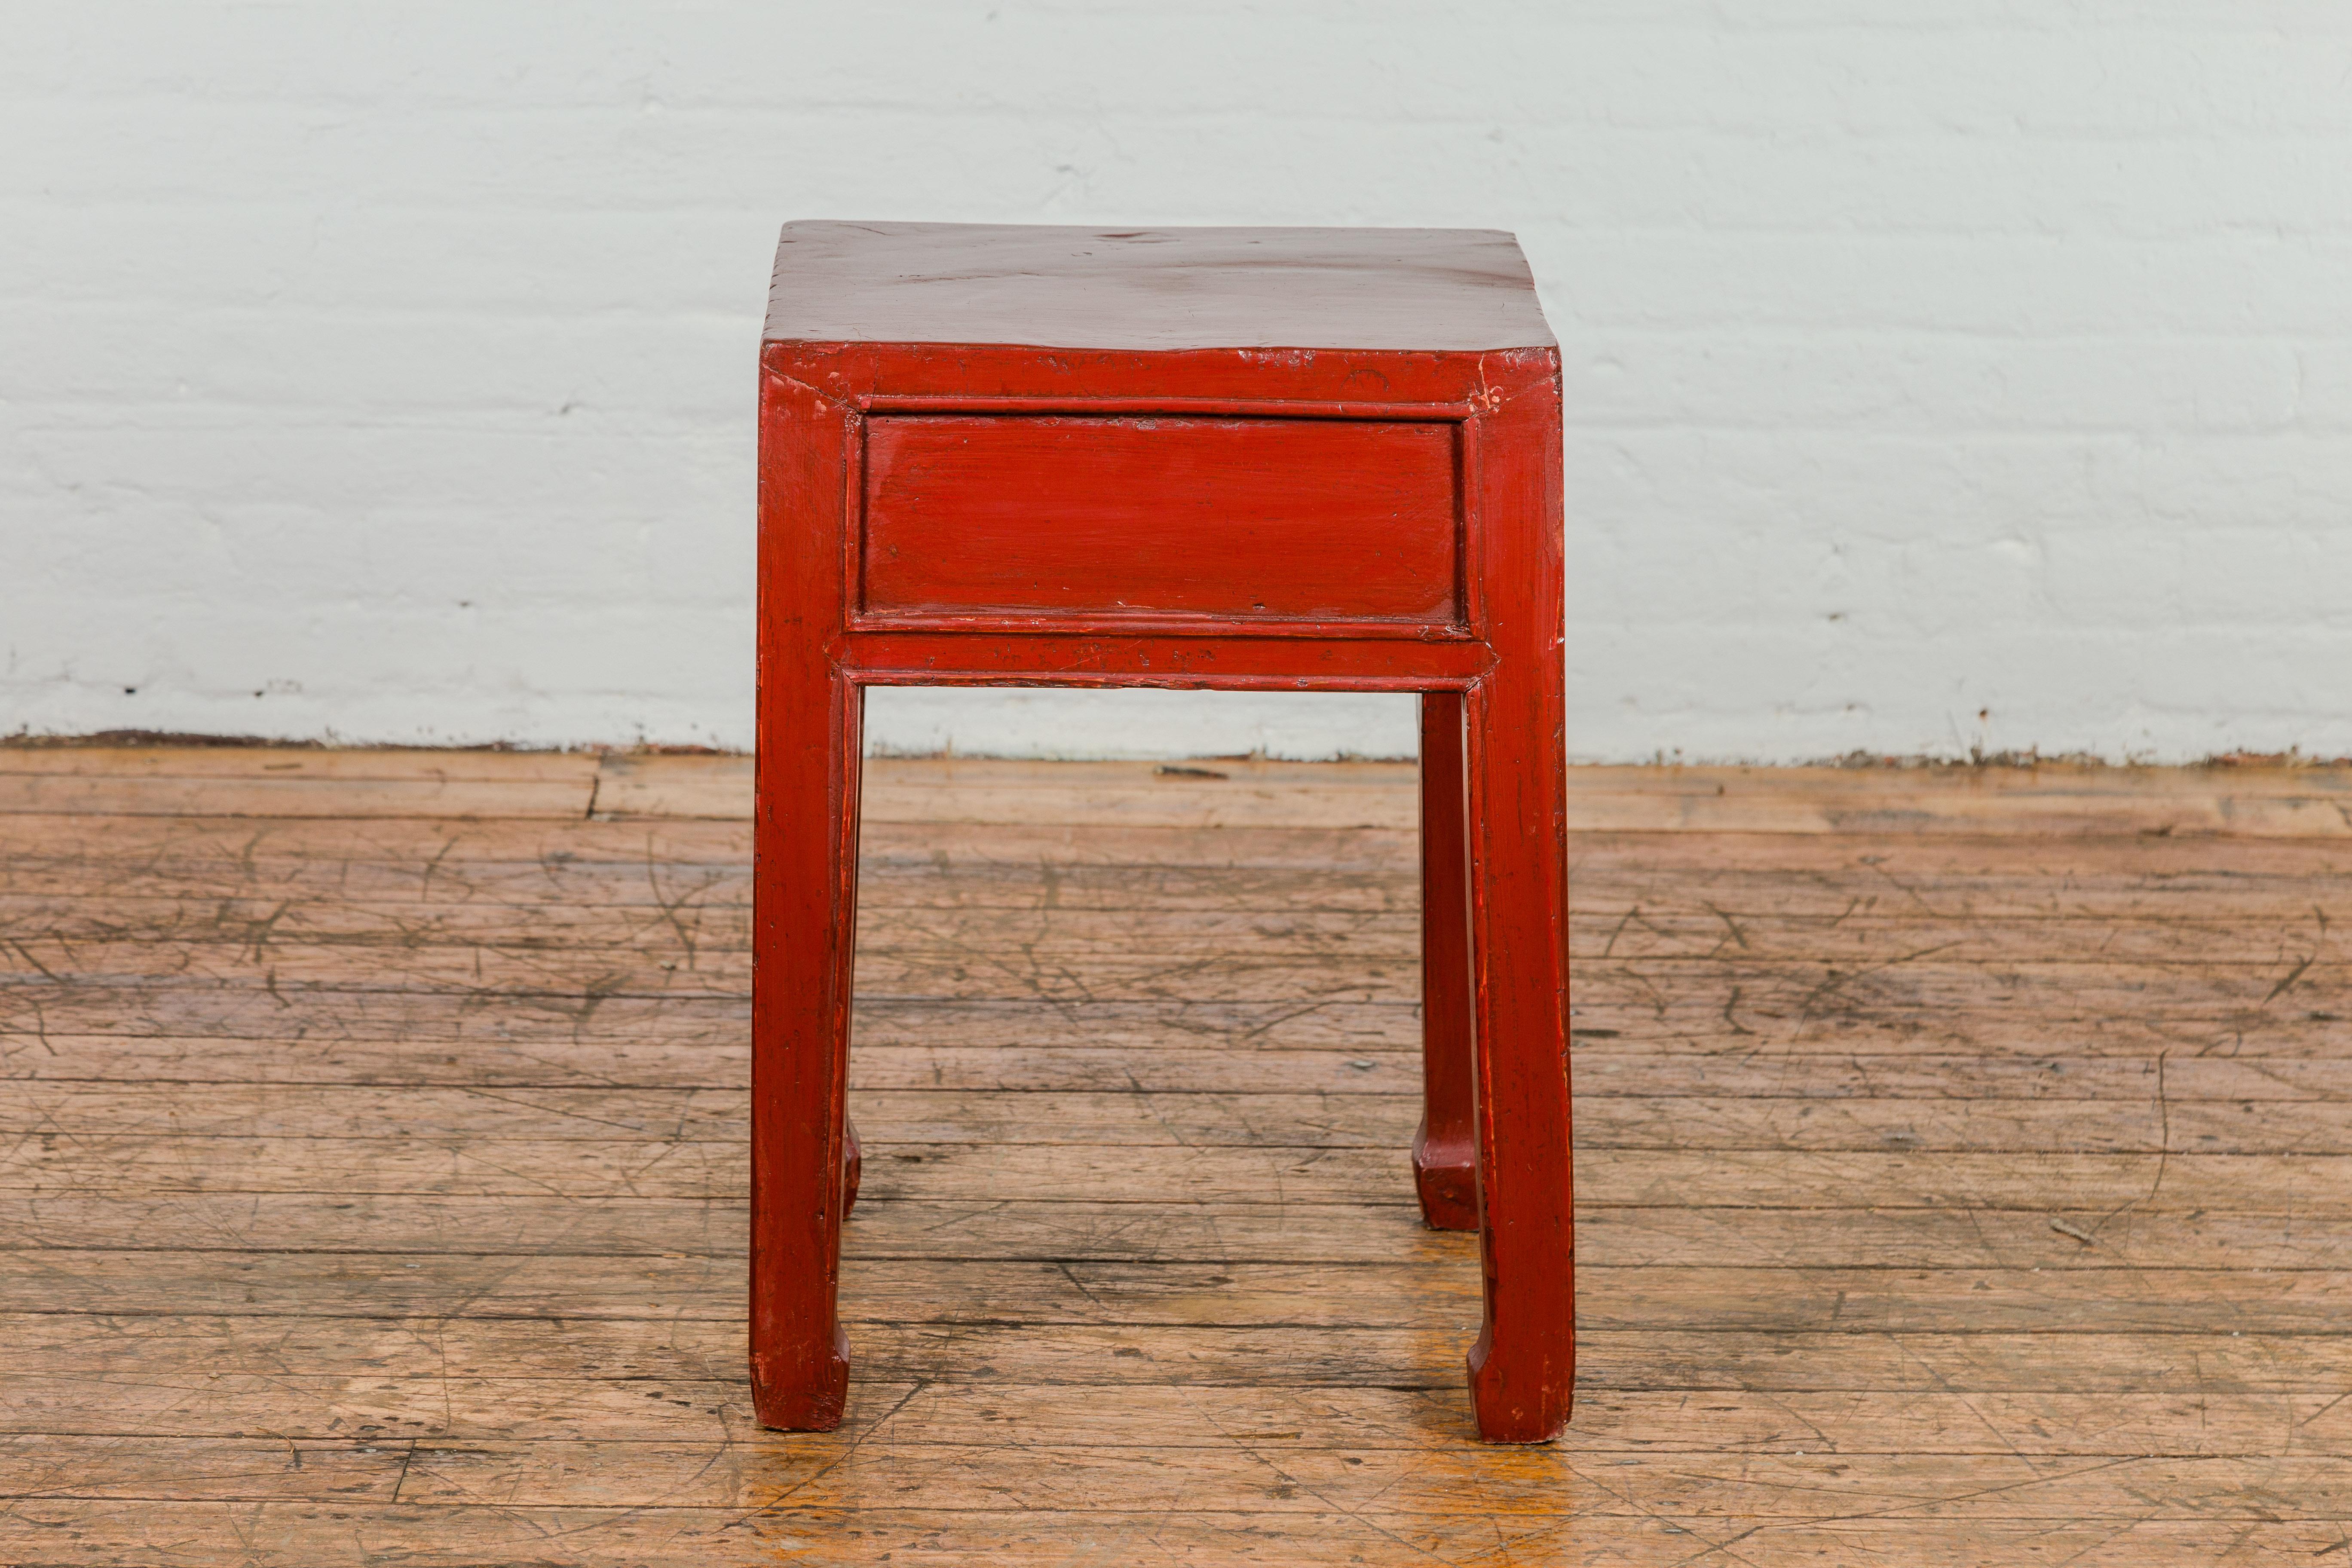 Late Qing Dynasty Red Lacquer Side Table with Single Drawer and Horse Hoof Feet For Sale 4